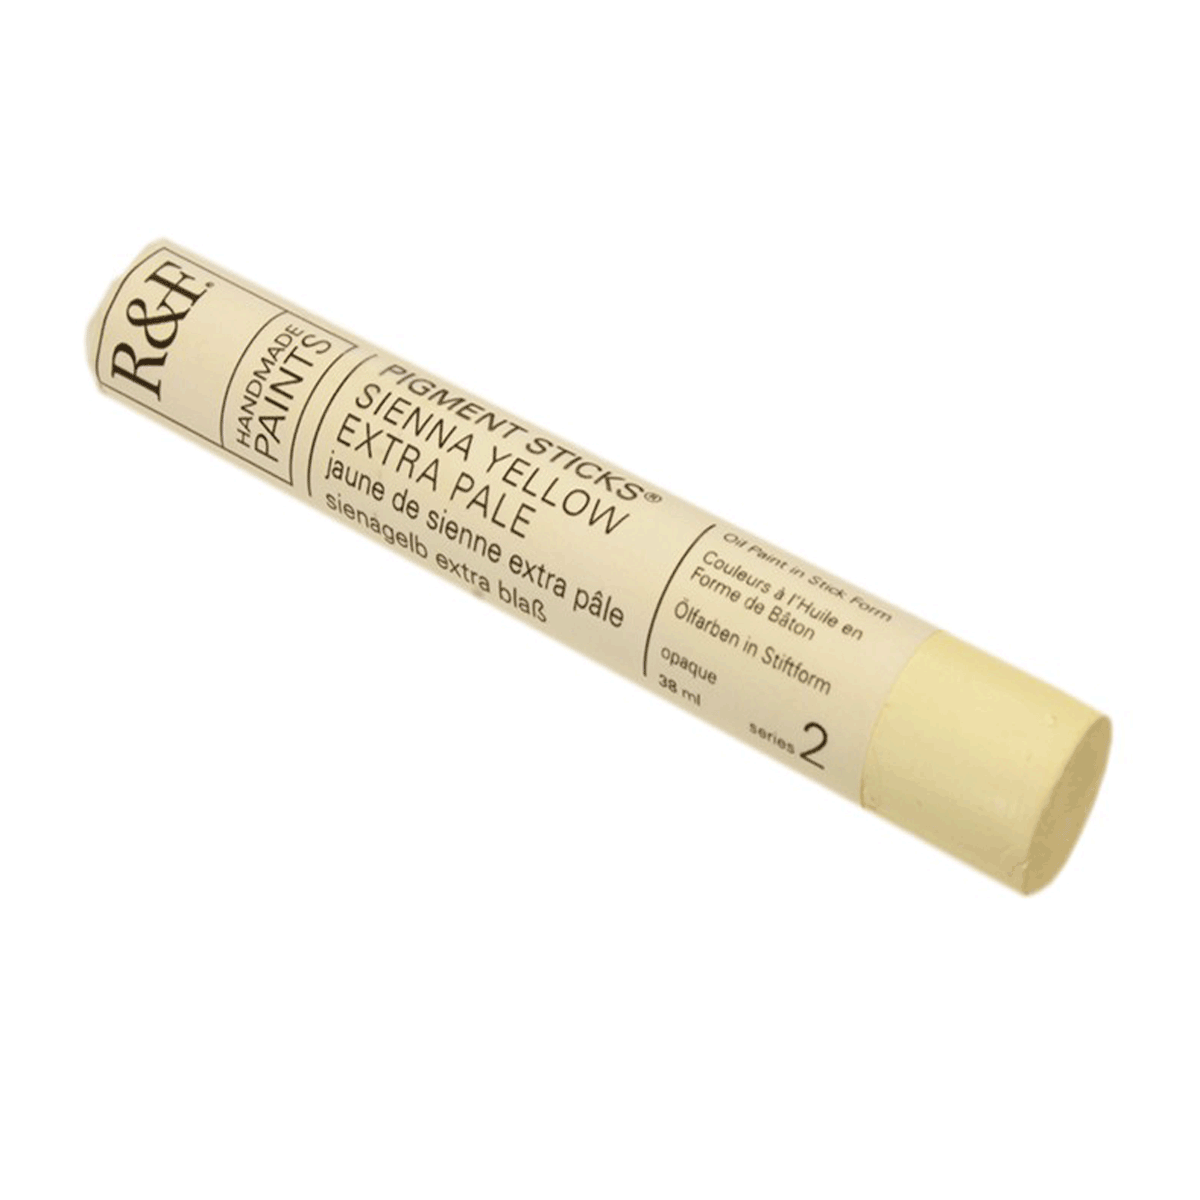 R&F Oil Pigment Stick, Sienna Yellow Extra Pale 38ml